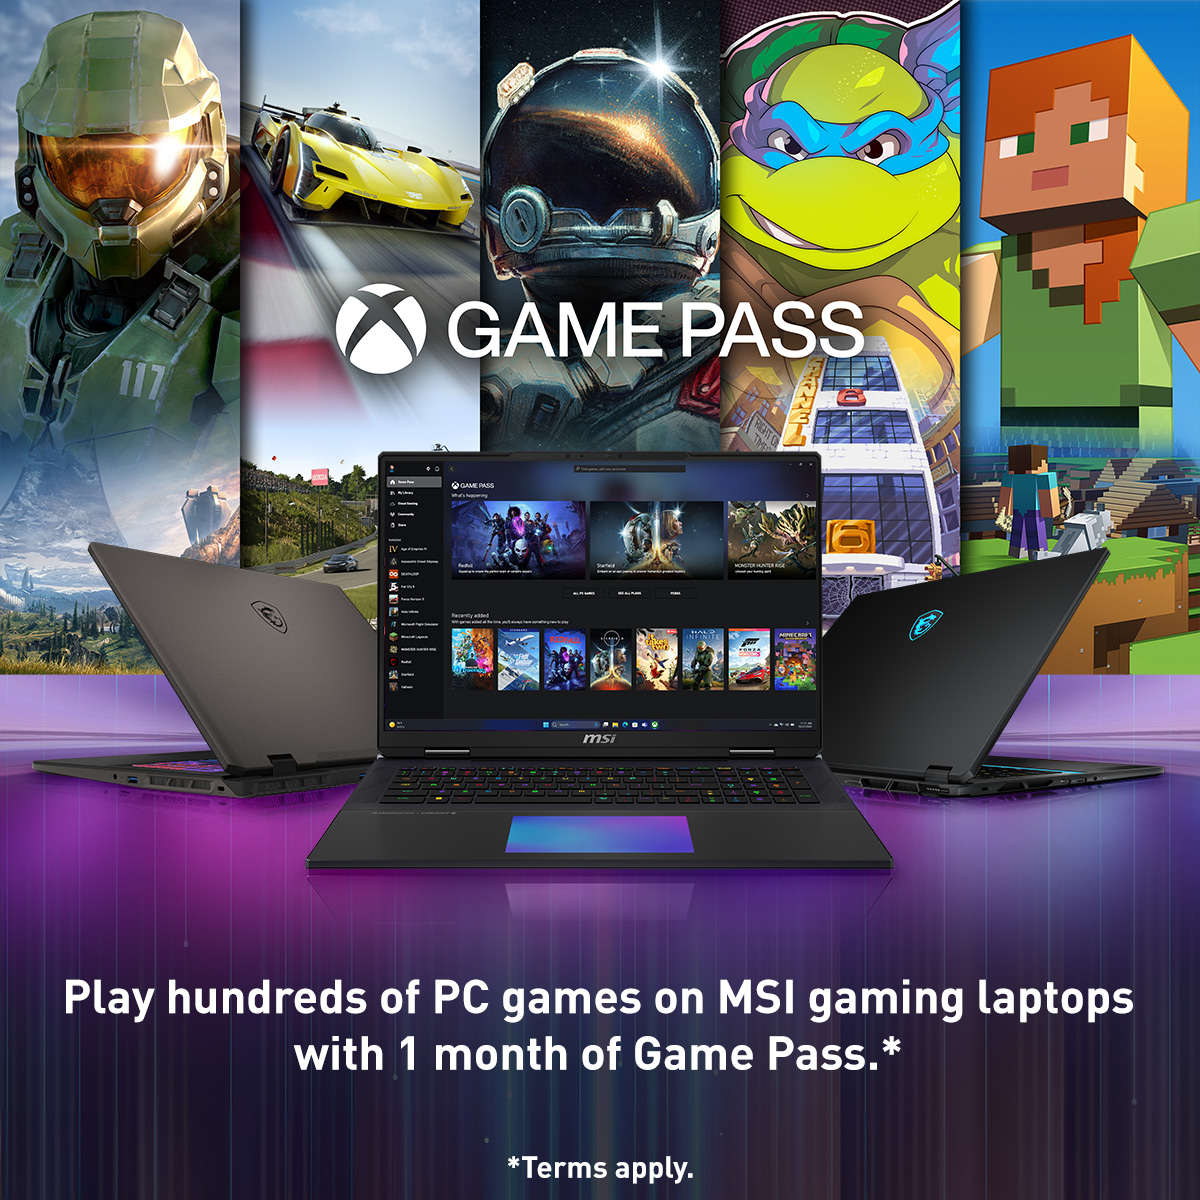 Gamers, heads up! 👀 Did you know that 1 month of Xbox Game Pass is included in your new MSI device? Redeem it now to play hundreds of PC games on it! 🎮

See T&C & how to redeem👉
msi.gm/S21AD300

#XboxGamePass #Gaminglaptop #MSIClaw